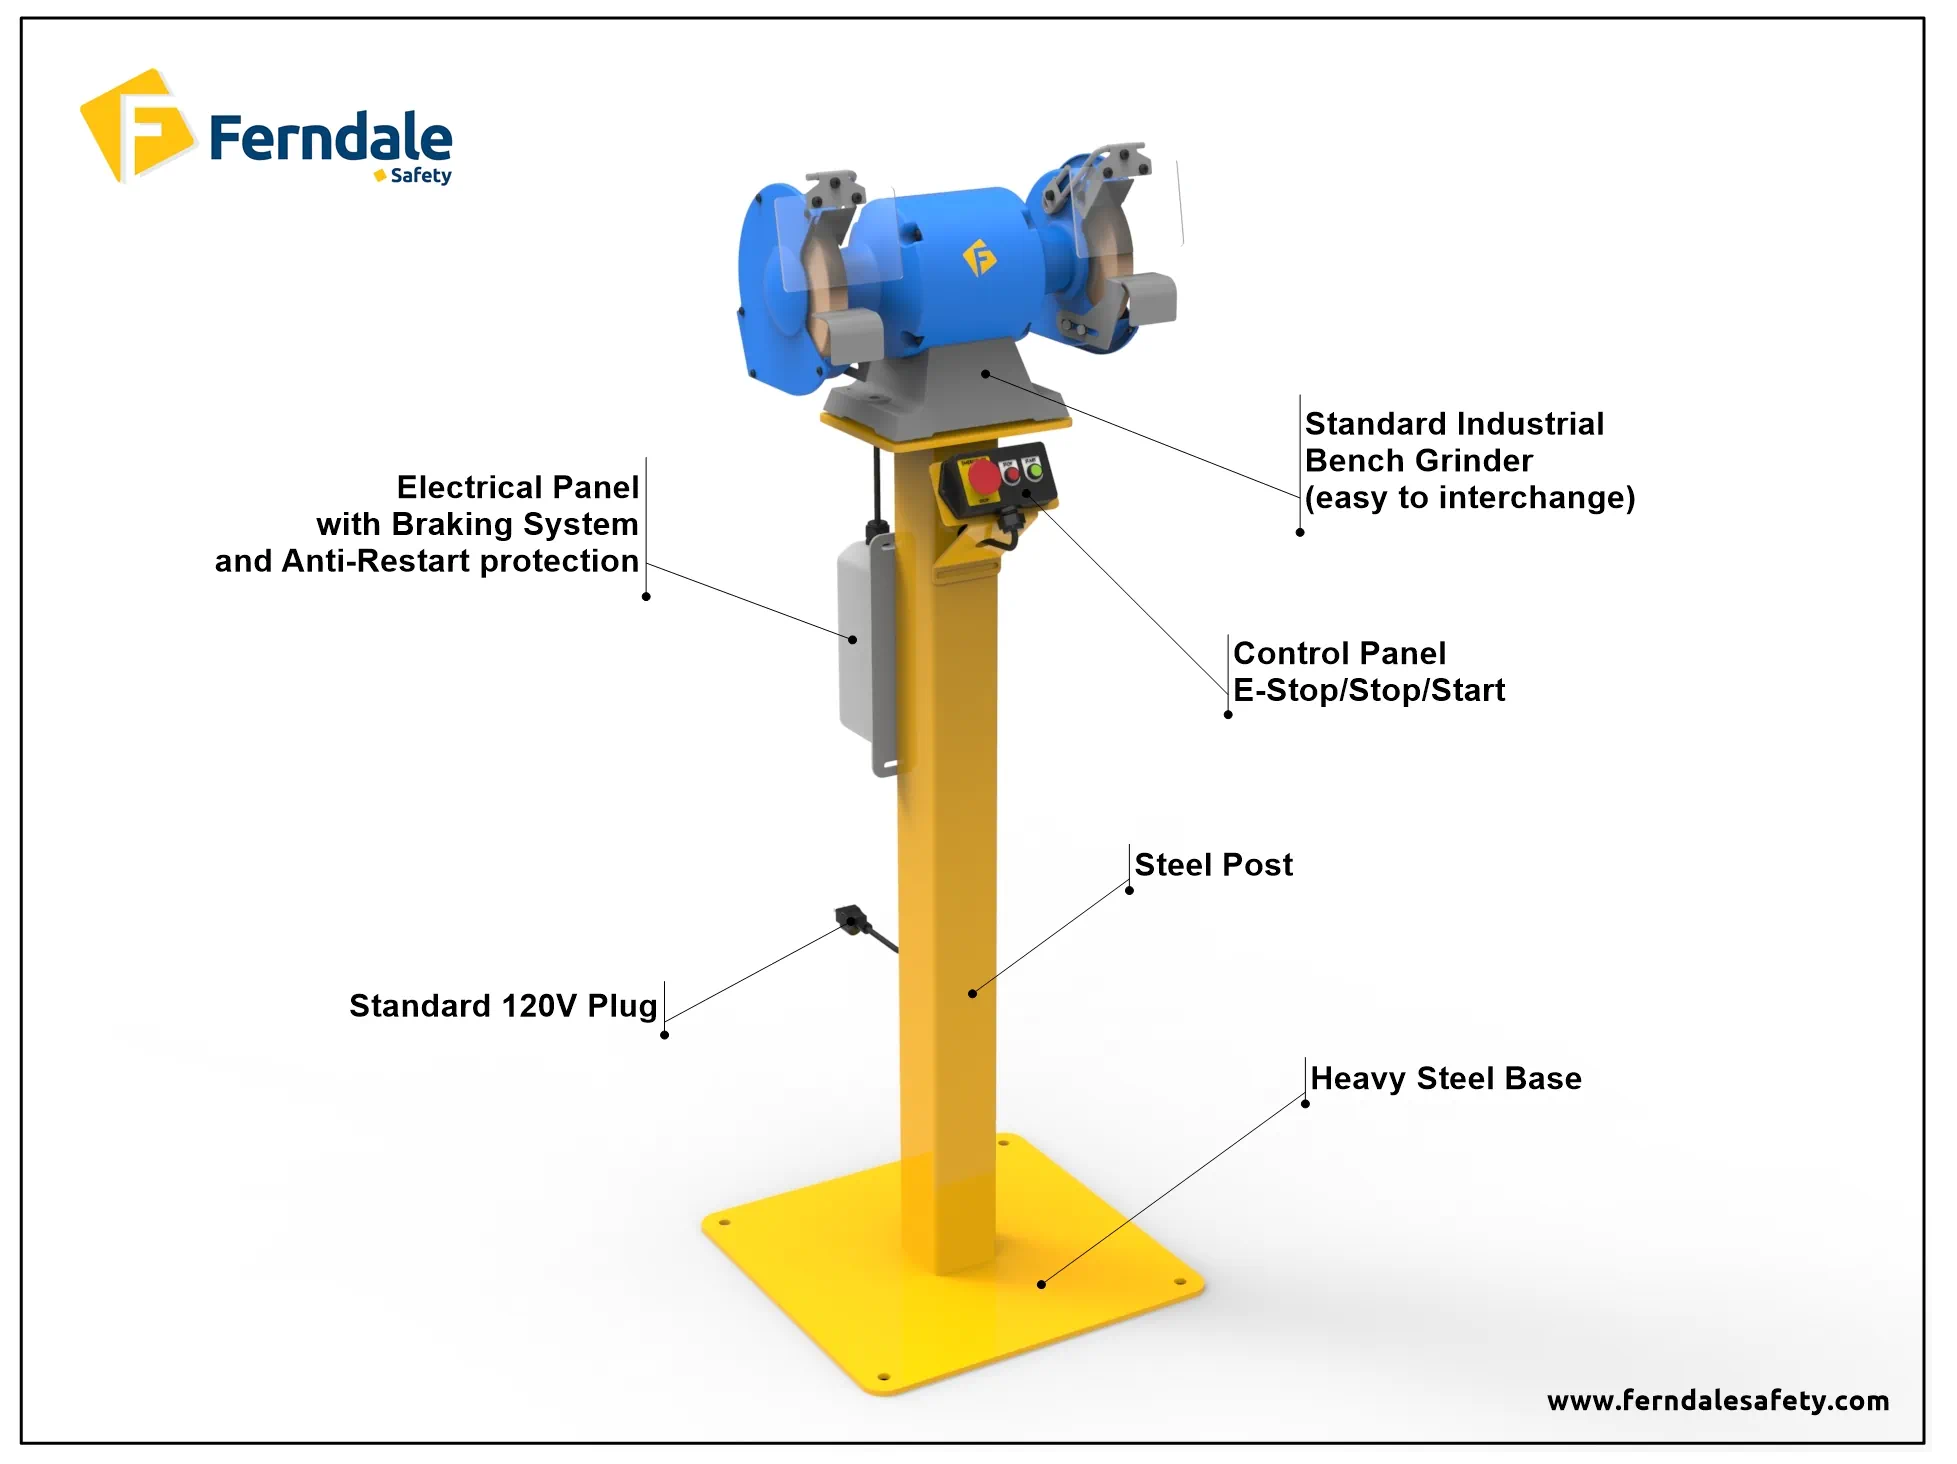 Bench grinder with pedestal and control system